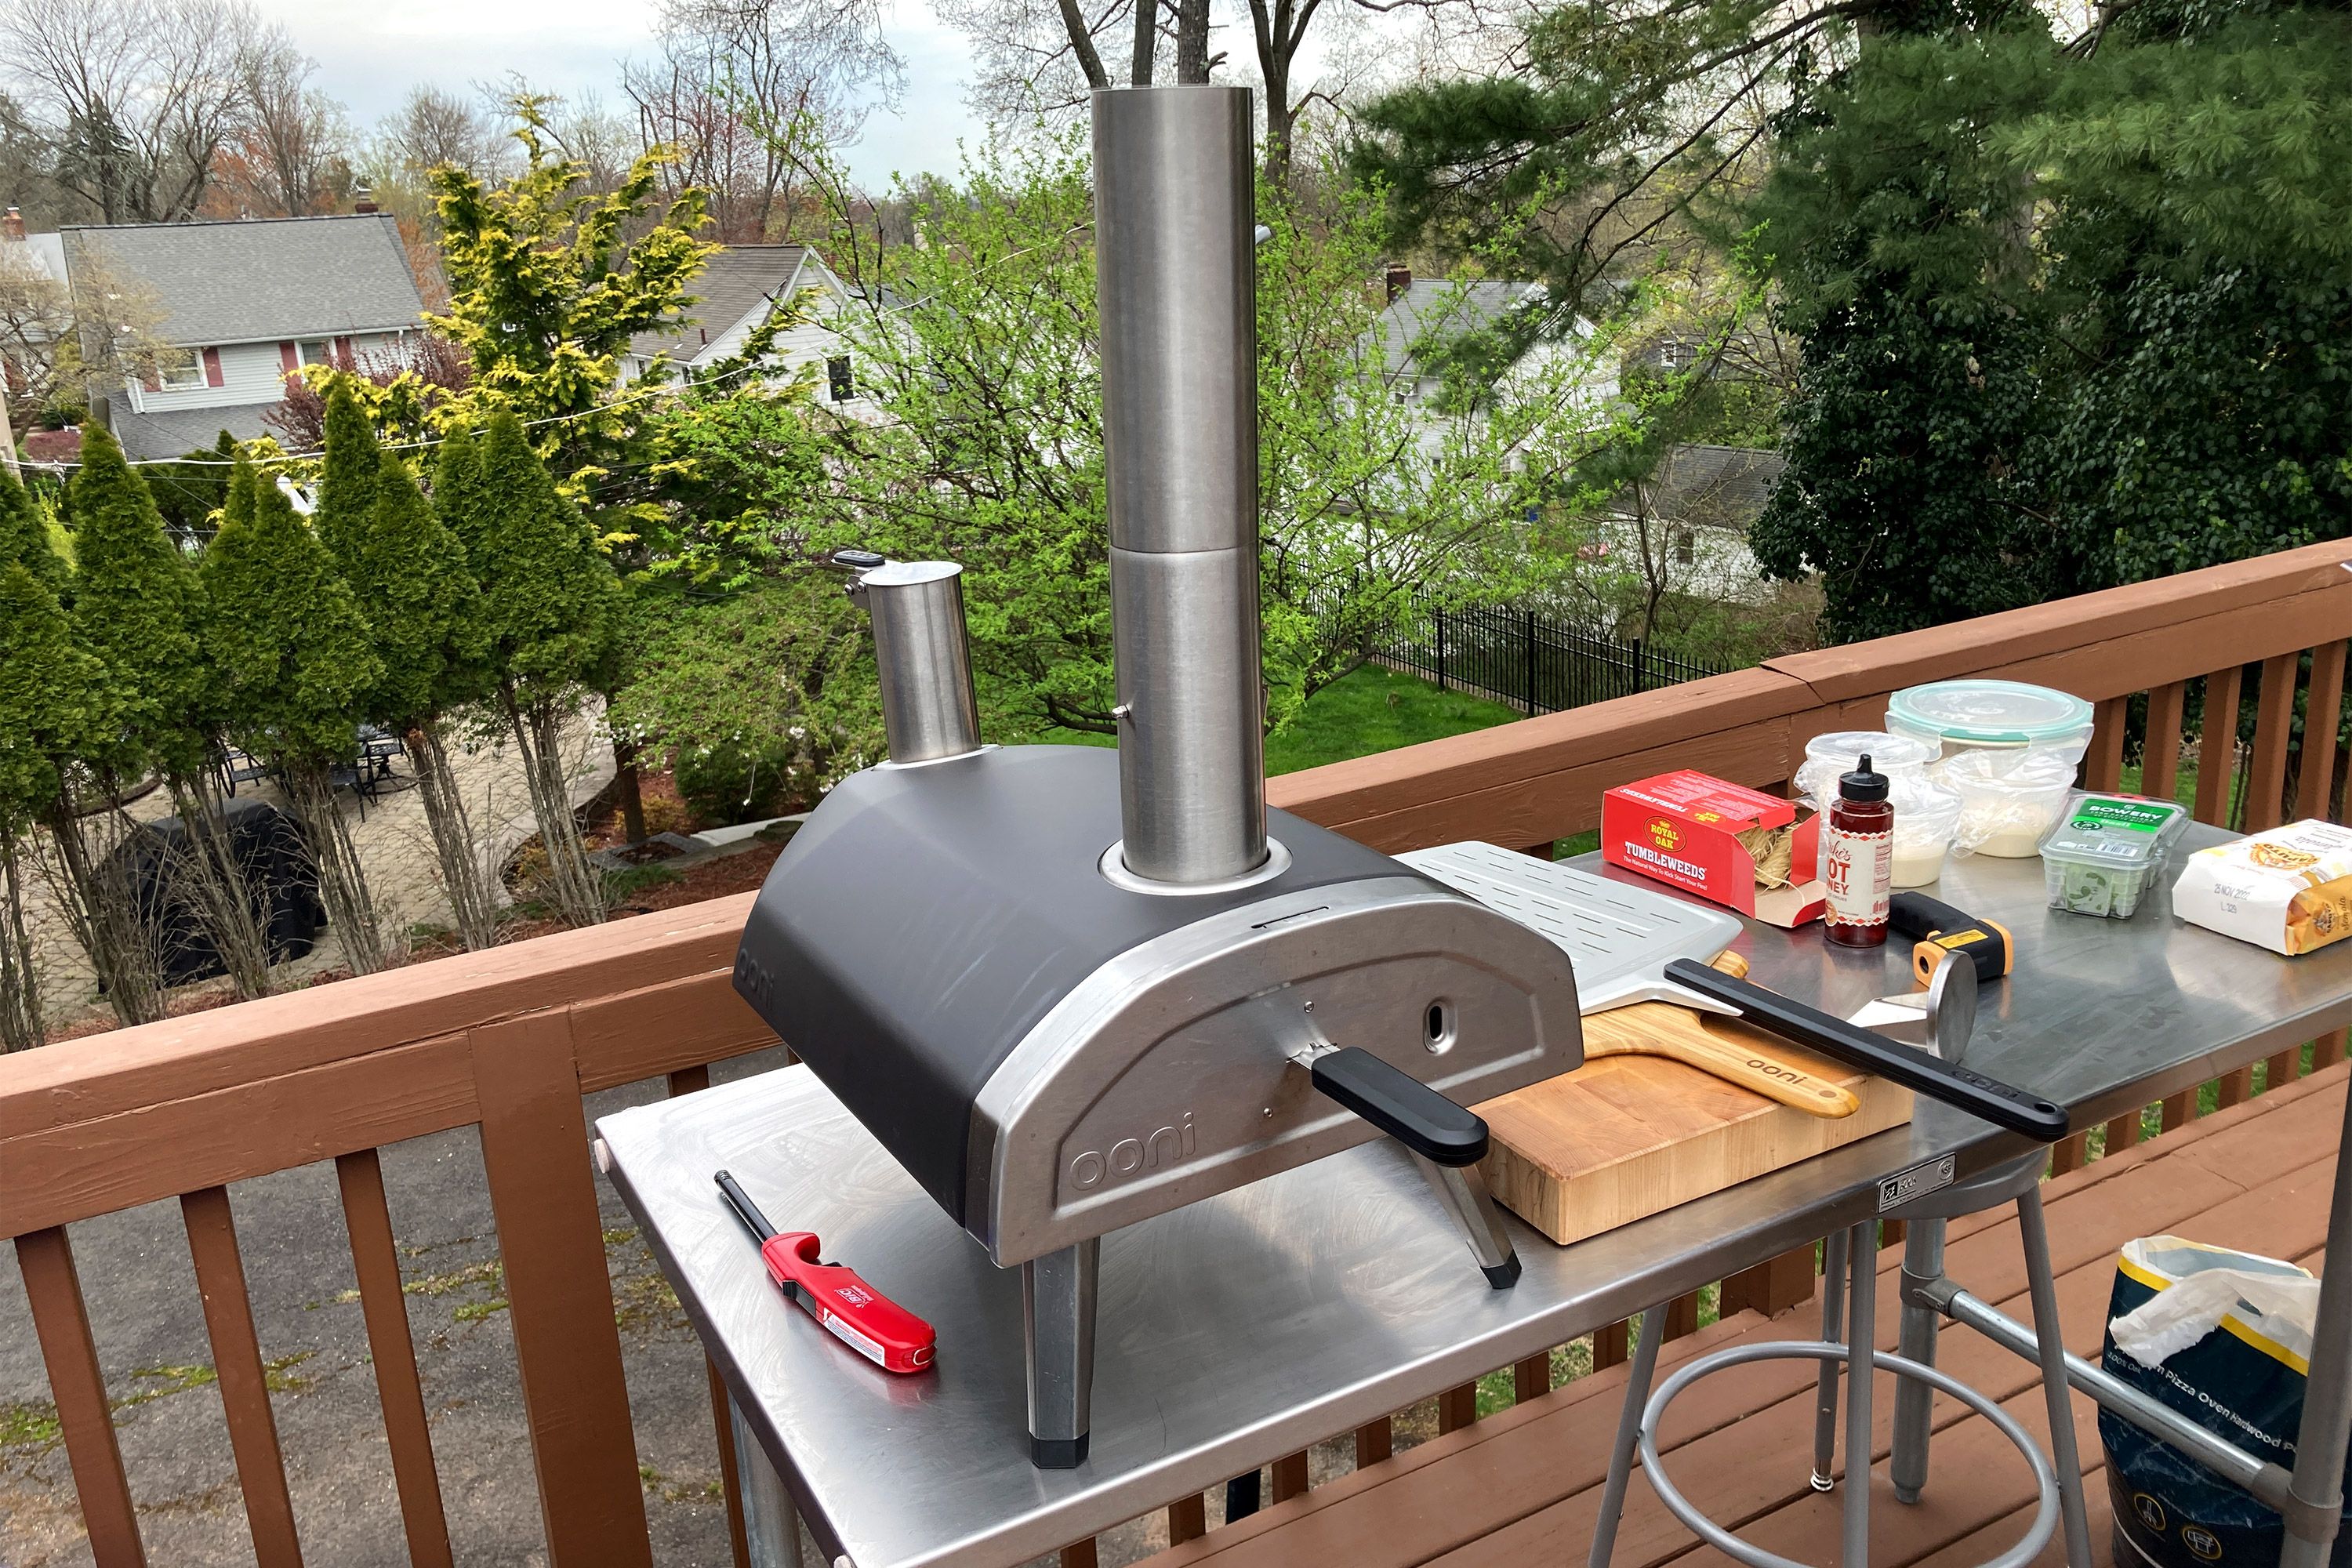 Ooni Koda 16 Review: Large Pies With a Budget Backyard Pizza Oven